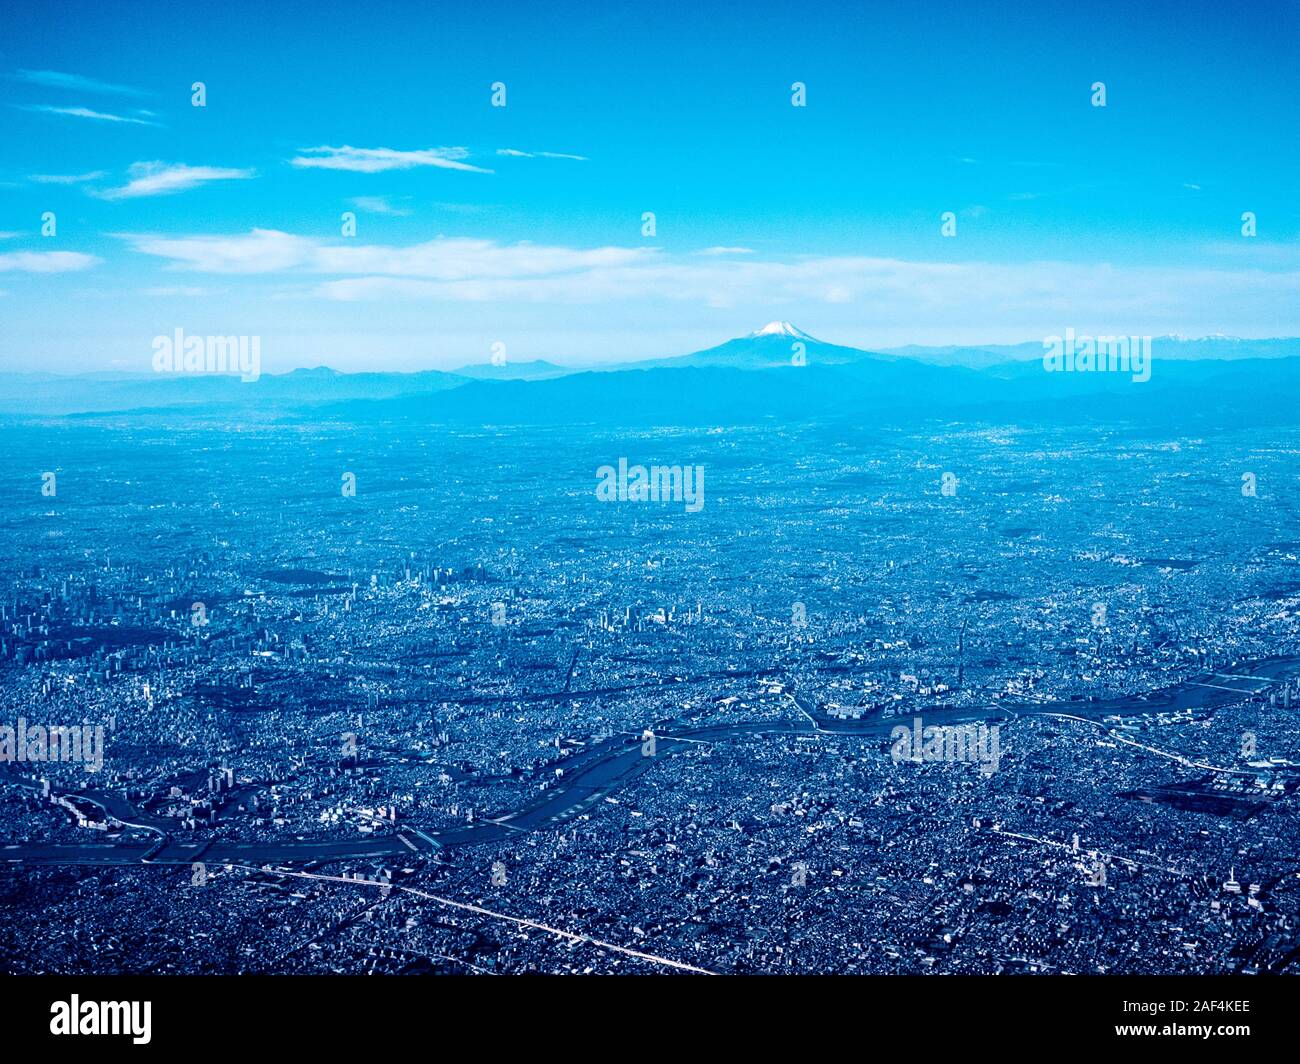 Aerial view of Kanto plain with Mount Fuji in the background Stock Photo